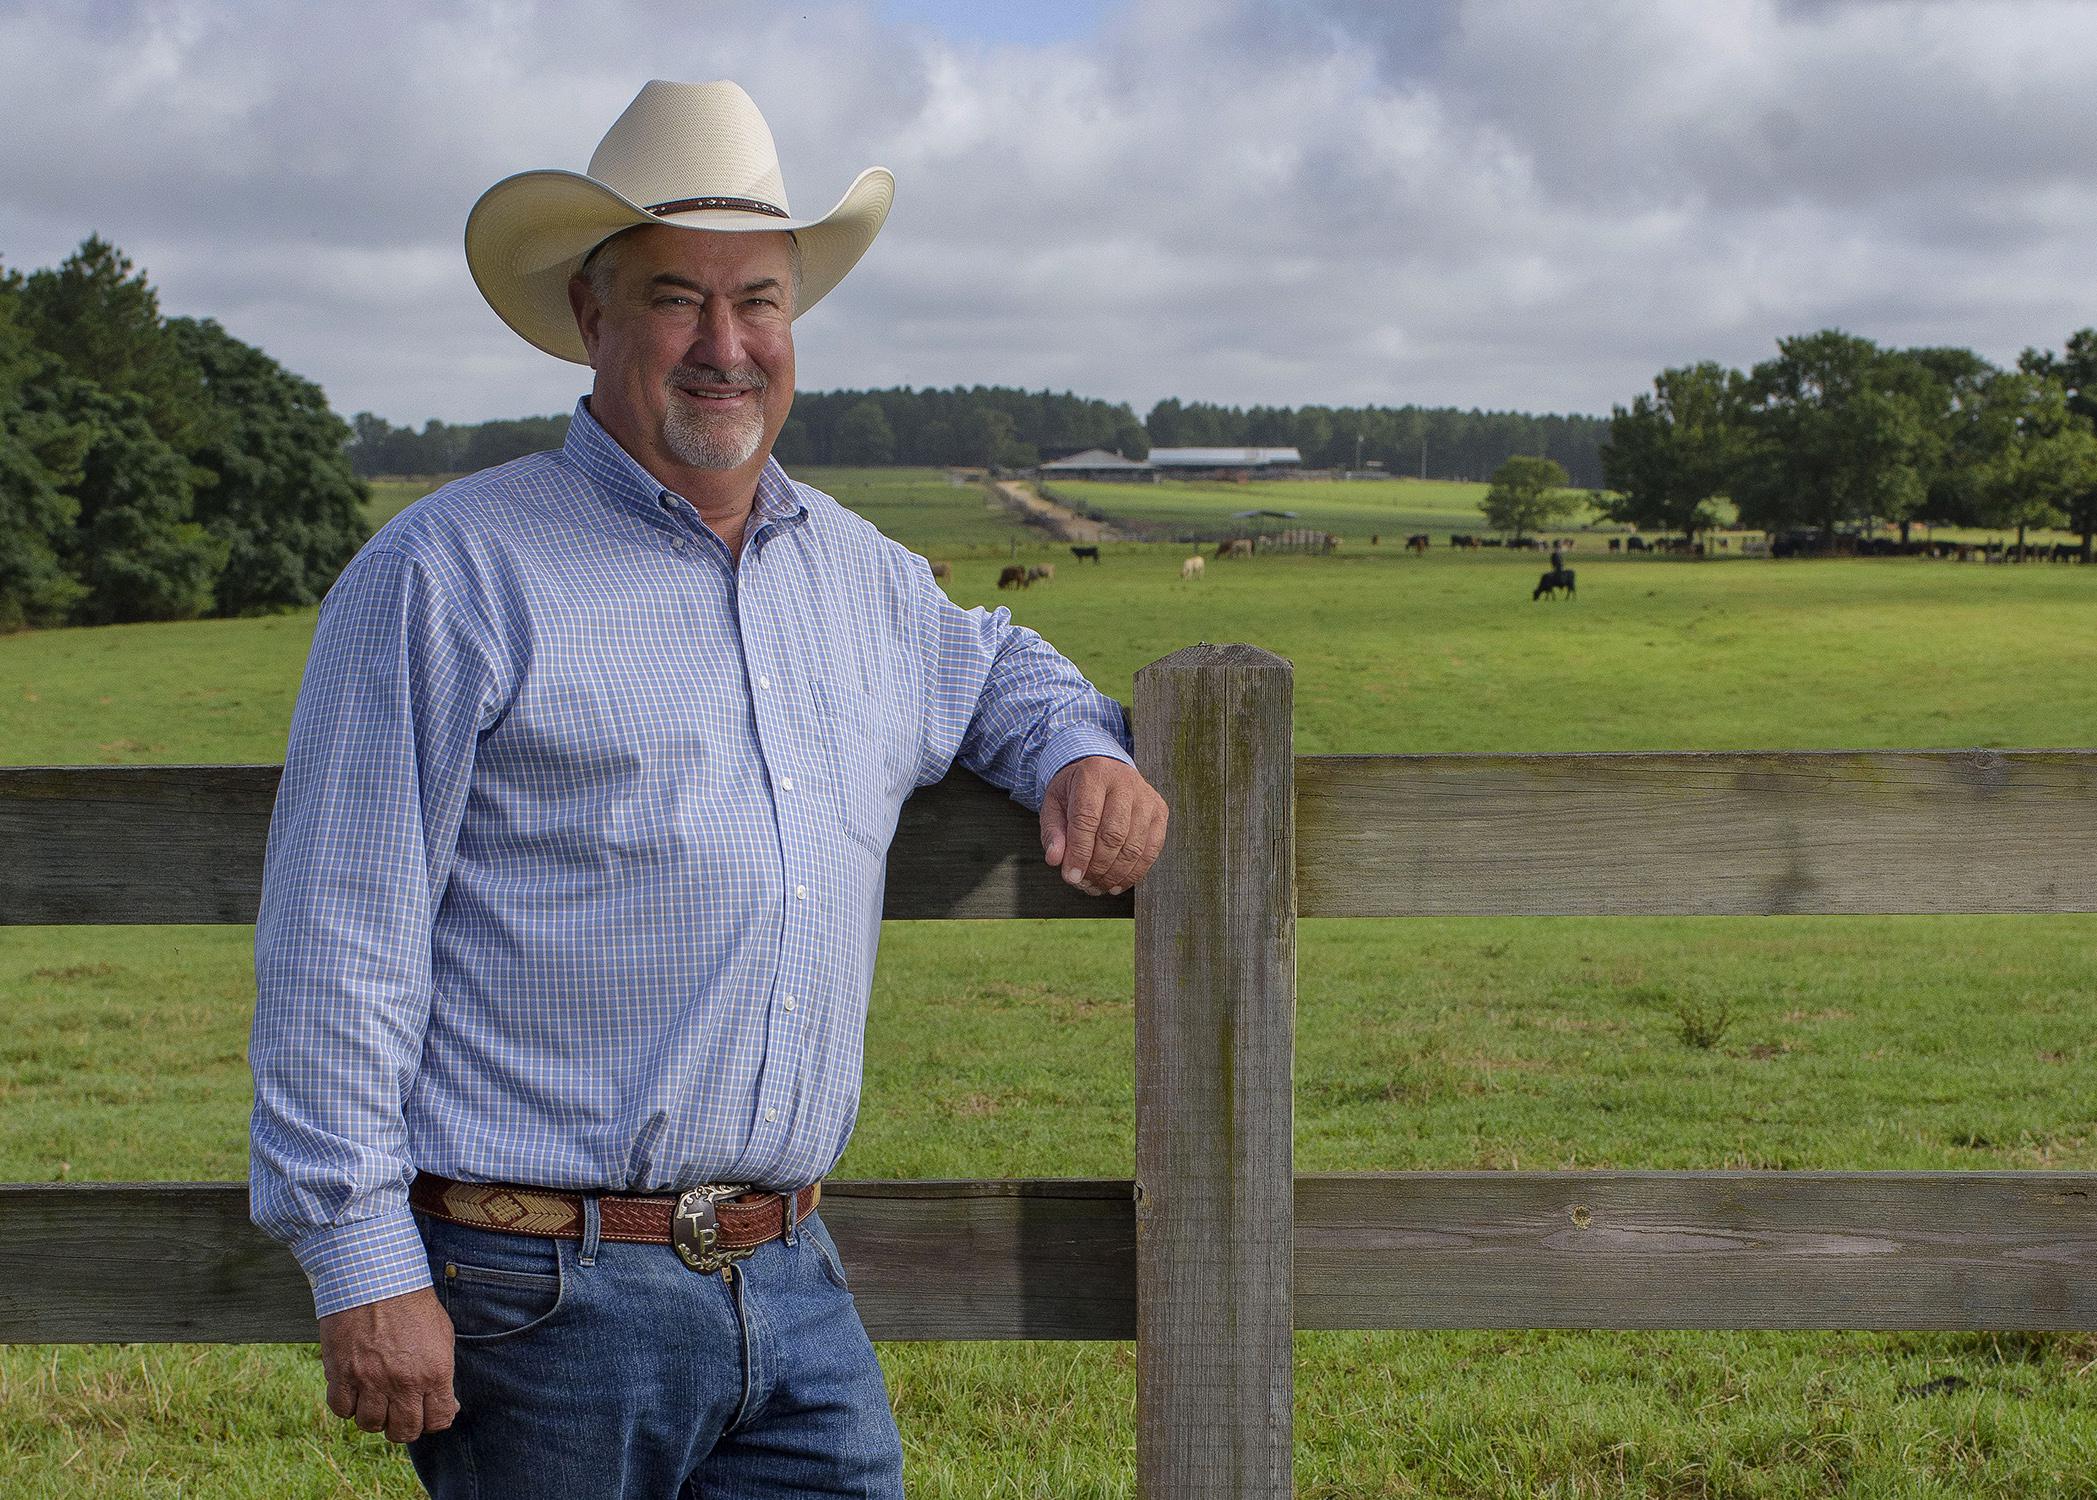 Man wearing a cowboy hat standing against a fence in front of a field with cows grazing.